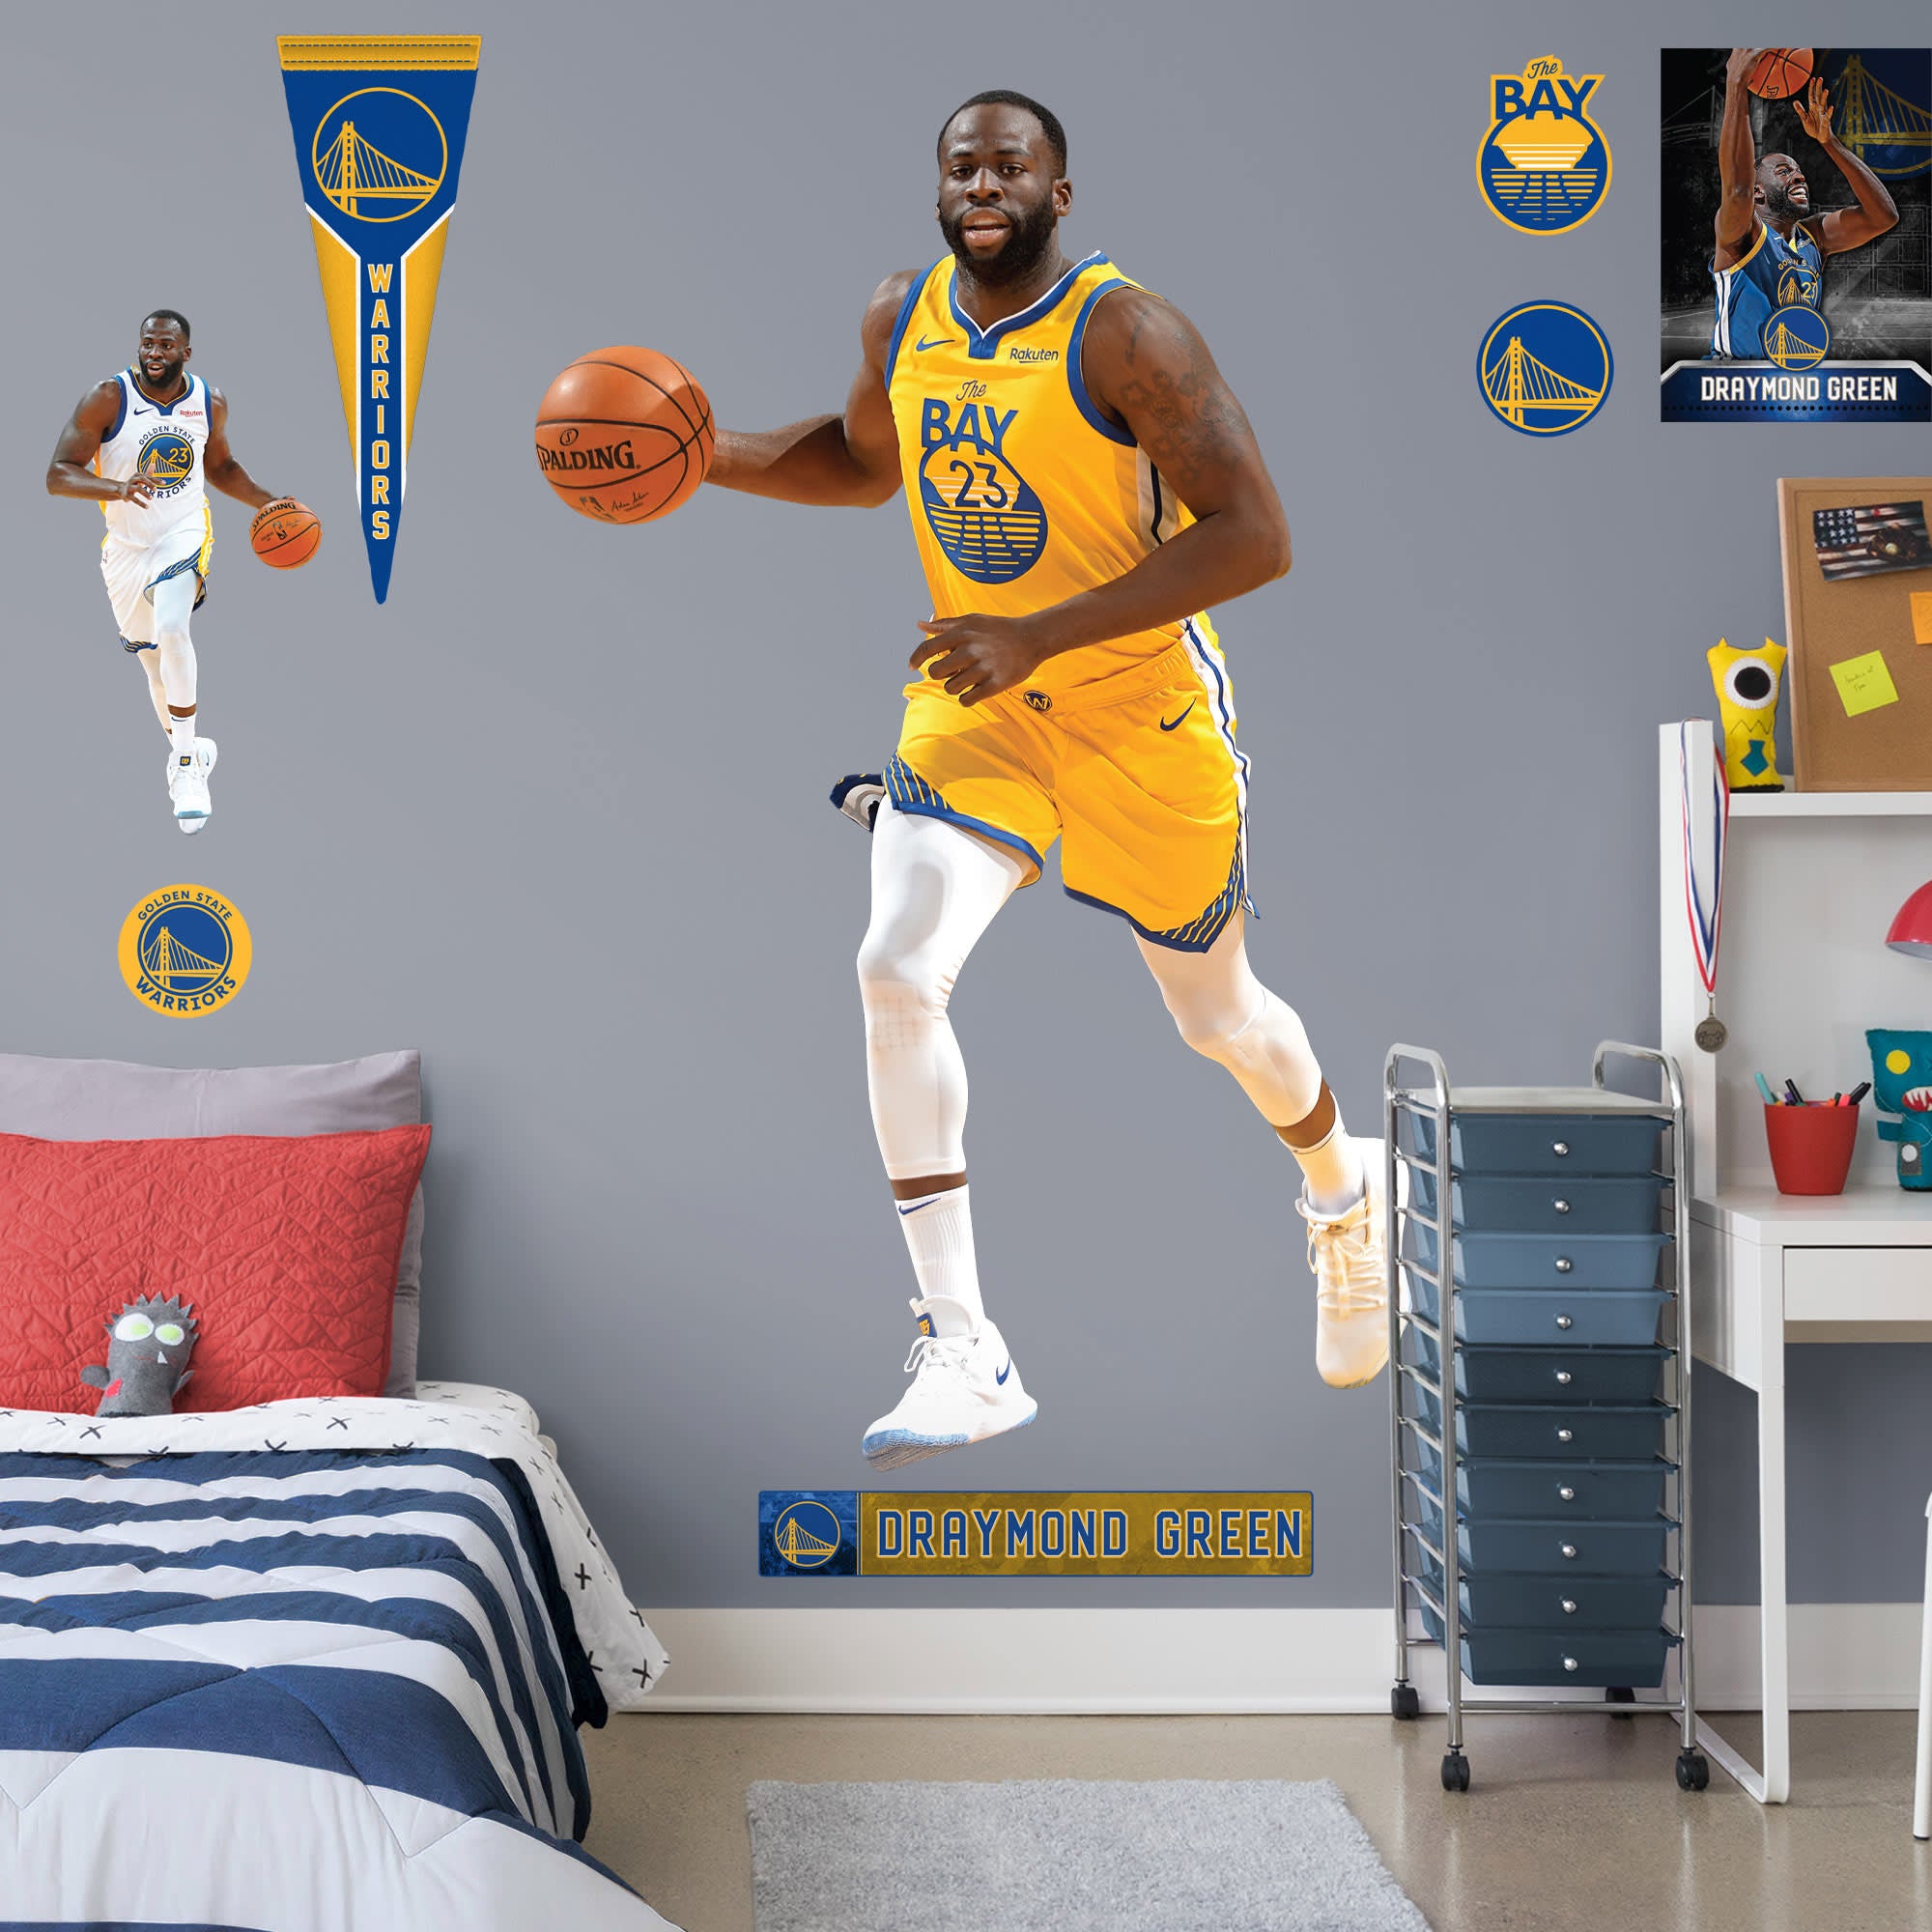 Draymond Green for Golden State Warriors - Officially Licensed NBA Removable Wall Decal Life-Size Athlete + 13 Decals (50"W x 78